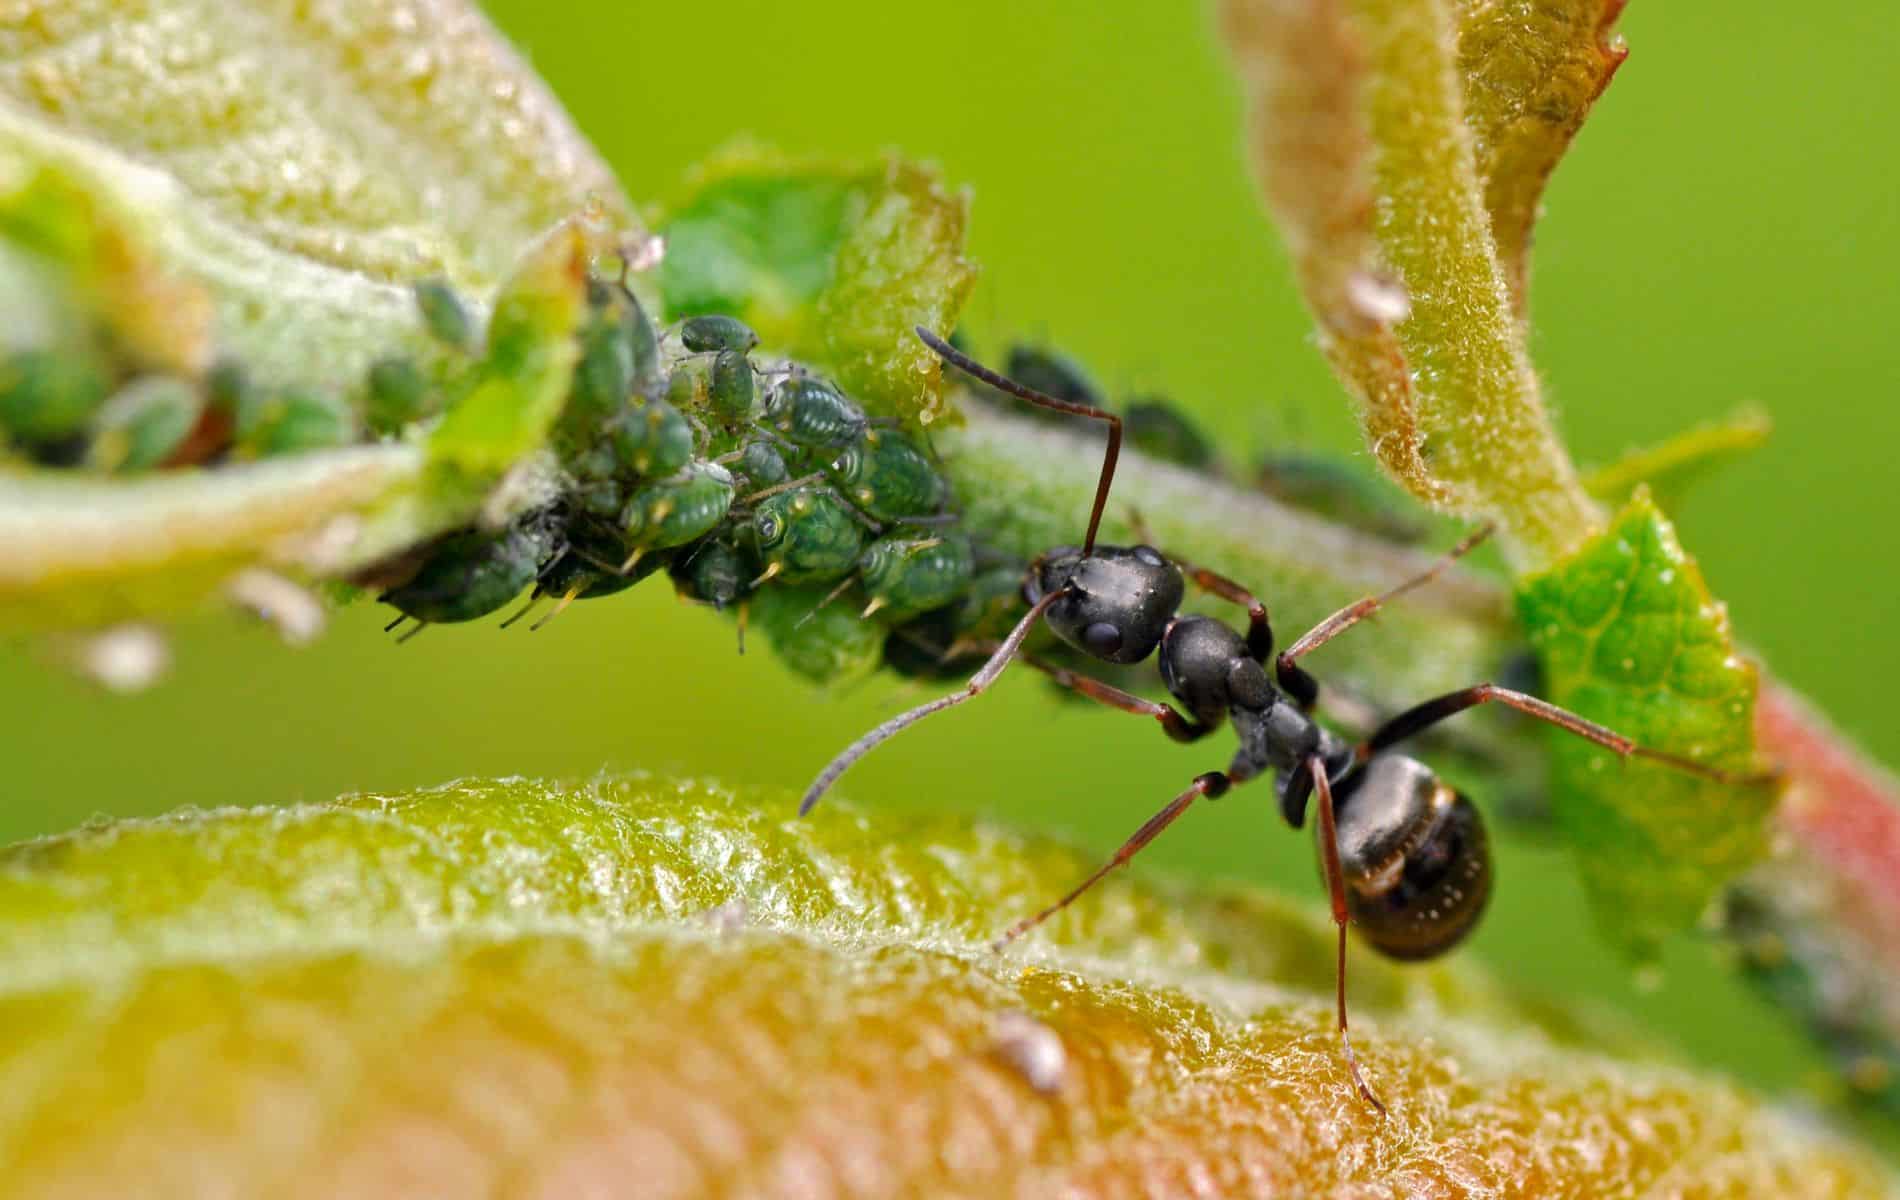 The sick ants treat themselves and eat an unappetizing diet